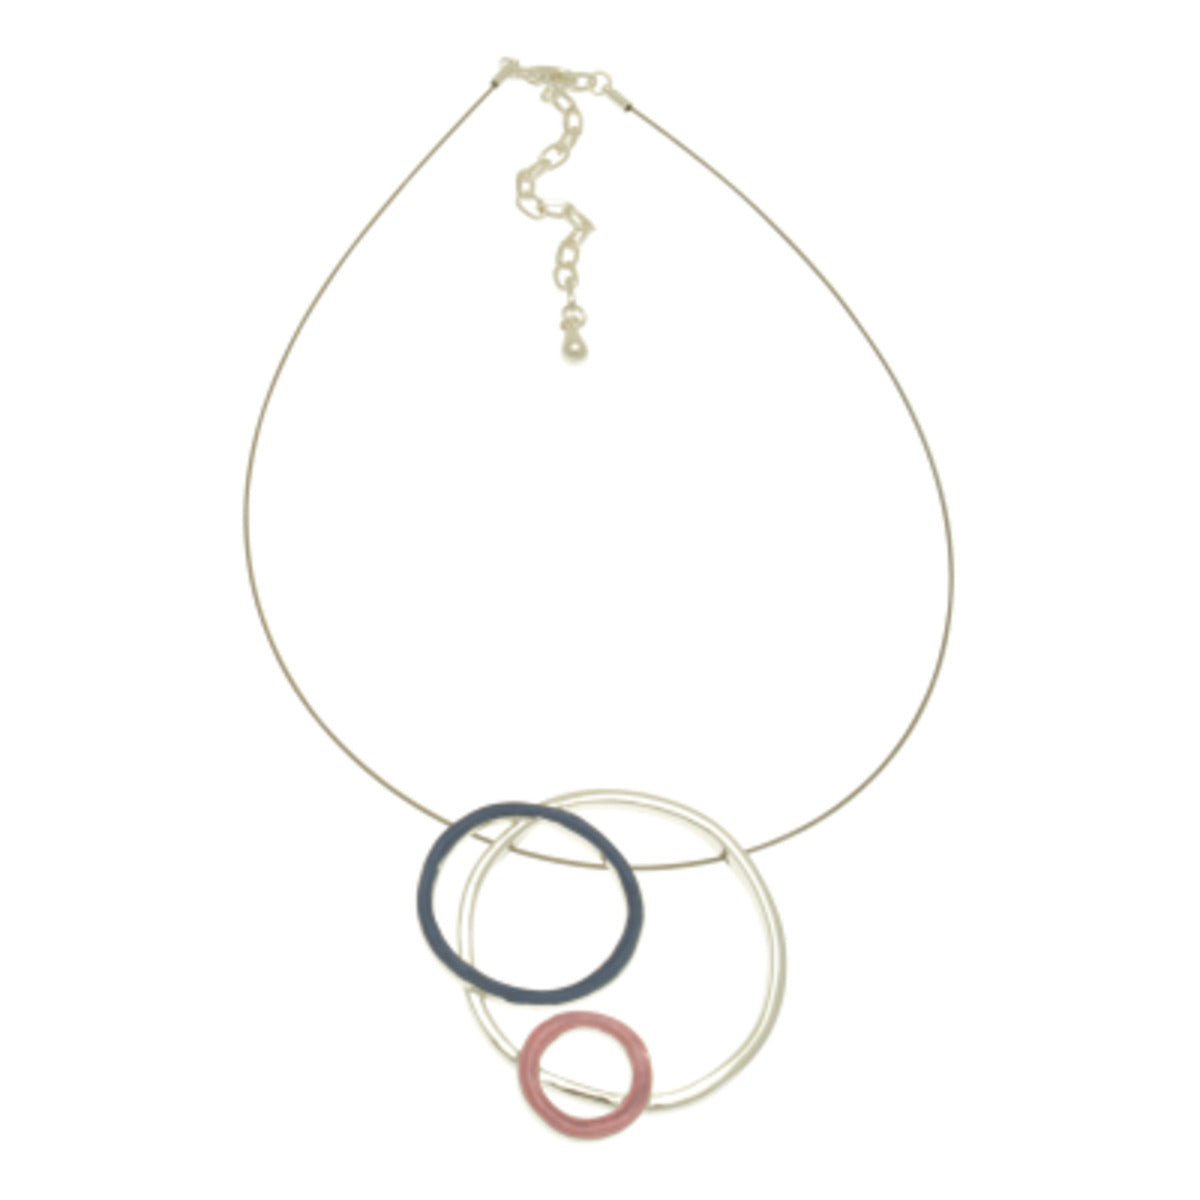 This stylish navy blue, pink, and imitation silver hoops necklace is a perfect way to add modern glamour to any outfit. Its geometric design and single wire give it a subtle yet eye-catching effect, allowing you to sparkle with effortless sophistication.  41cm or 16″ long and fastens with a lobster clasp and 8cm extension chain. The pendant measures approx 5cm in diameter.